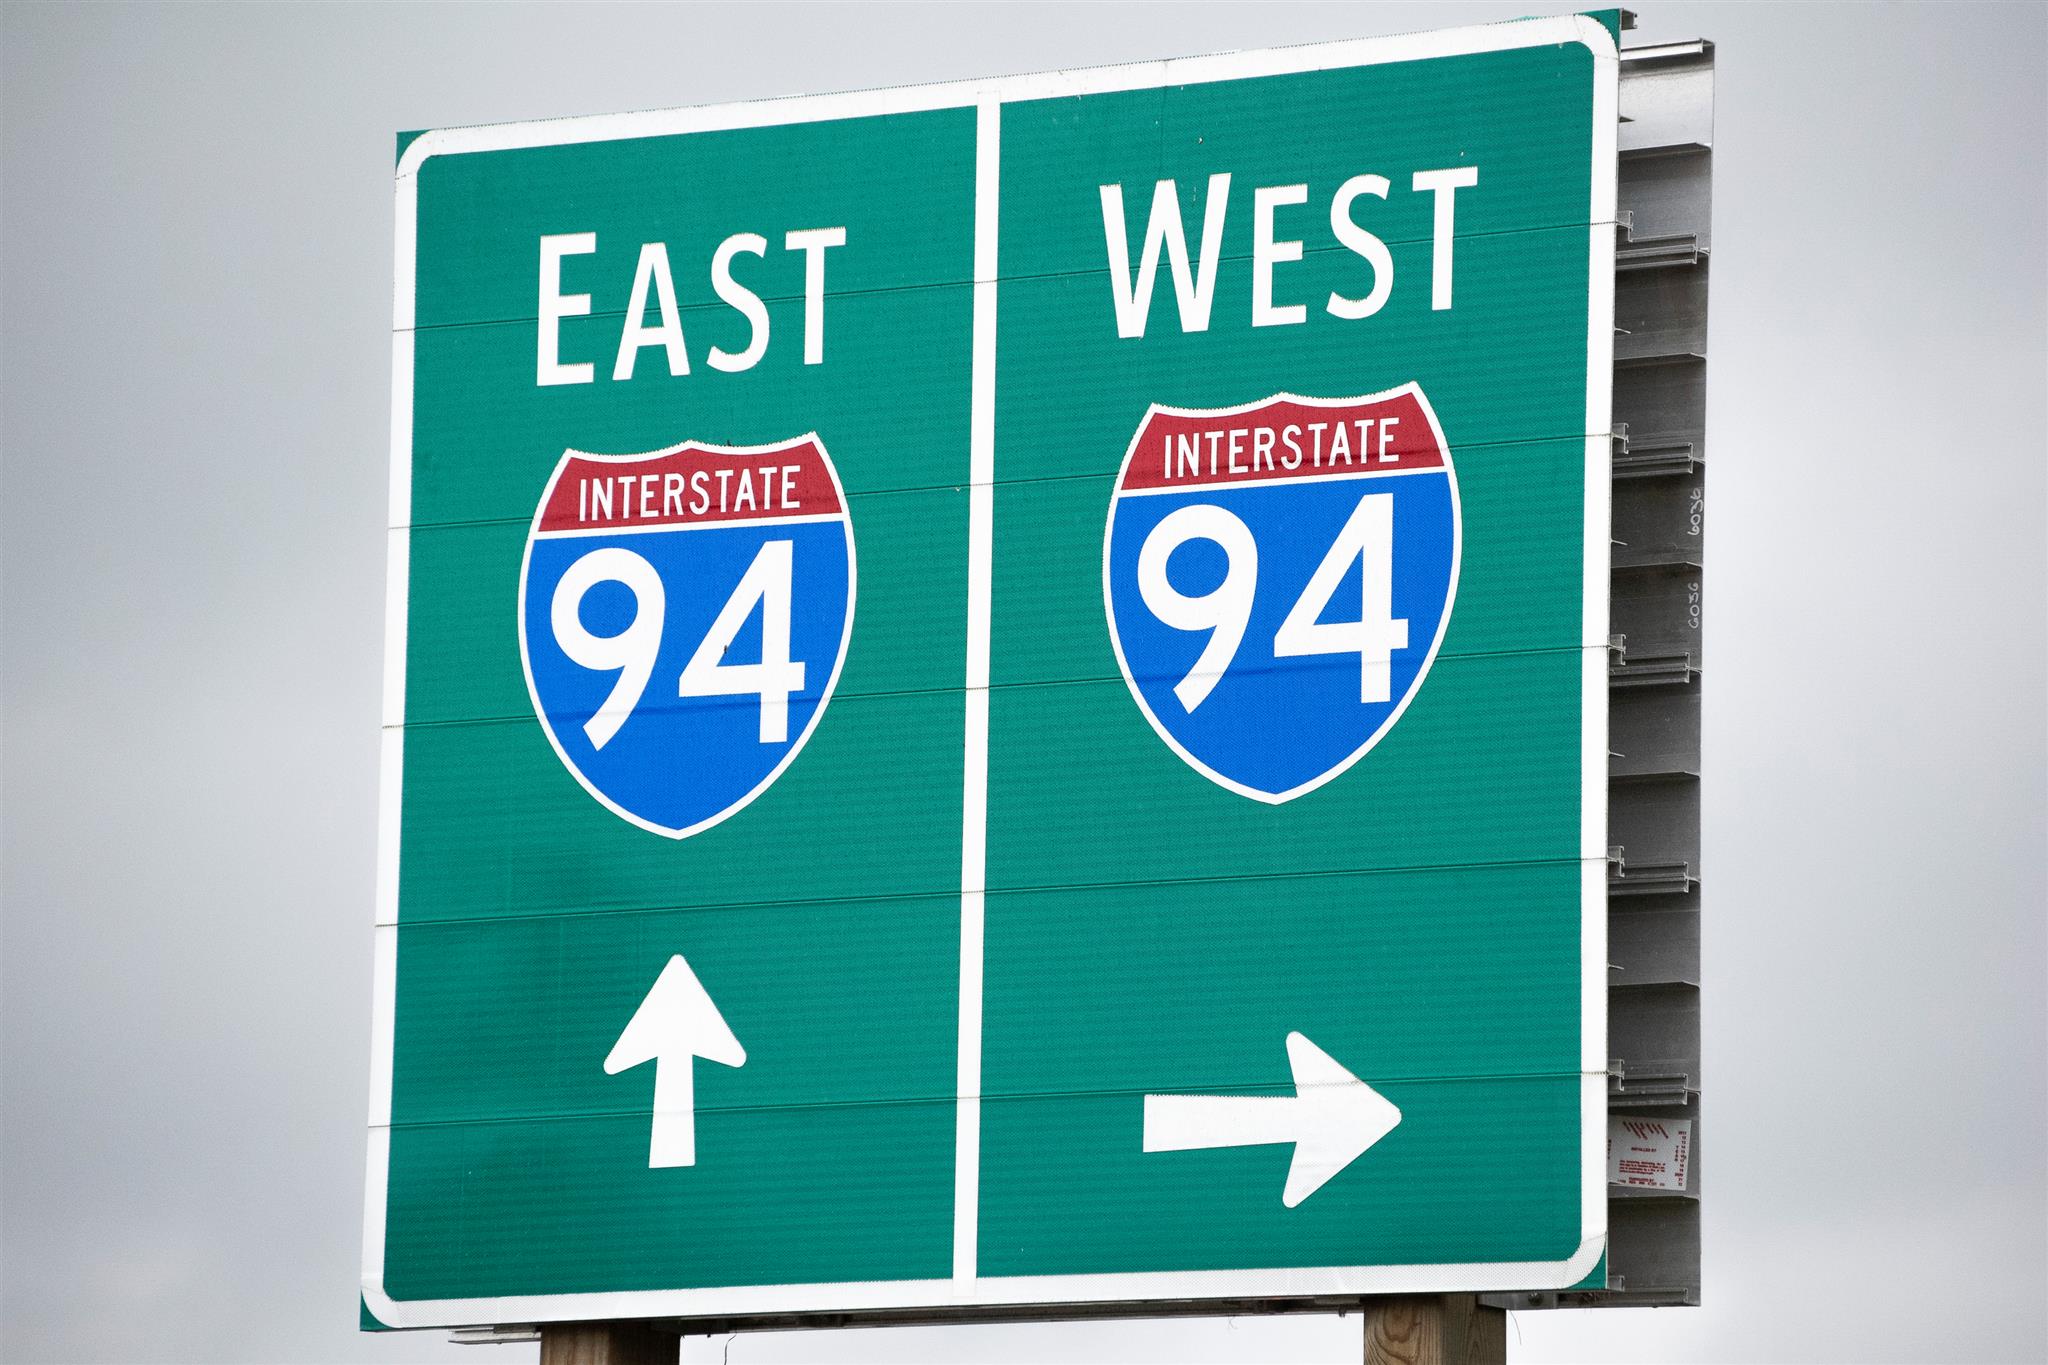 New I-94 dynamic message signs will alert drivers to dangerous